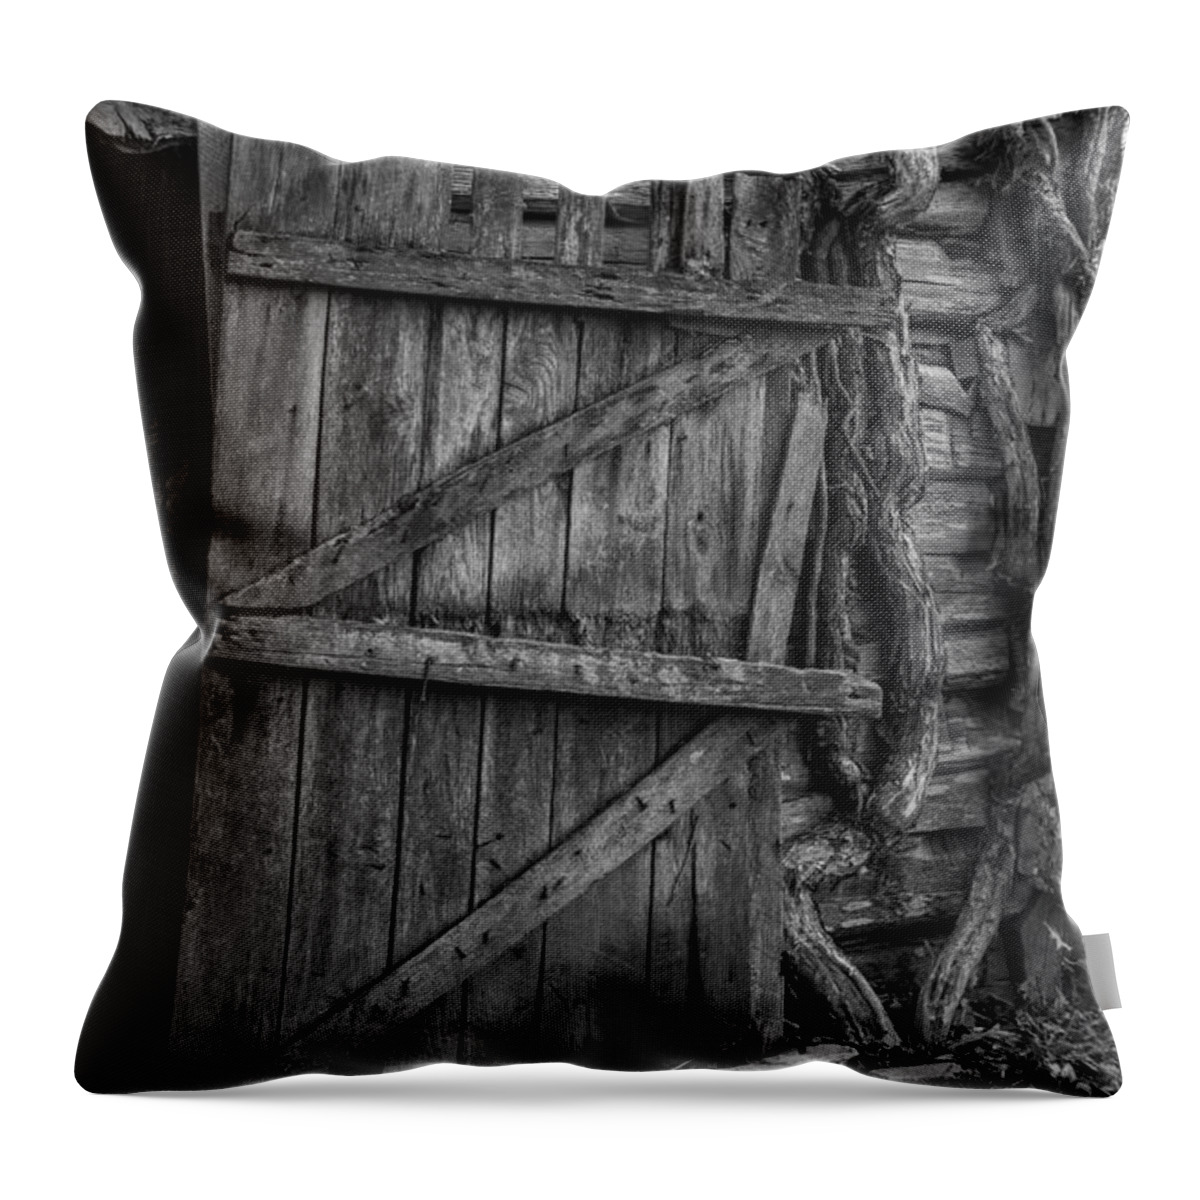 Landscape Throw Pillow featuring the photograph Black and White Barn Door by Amber Kresge